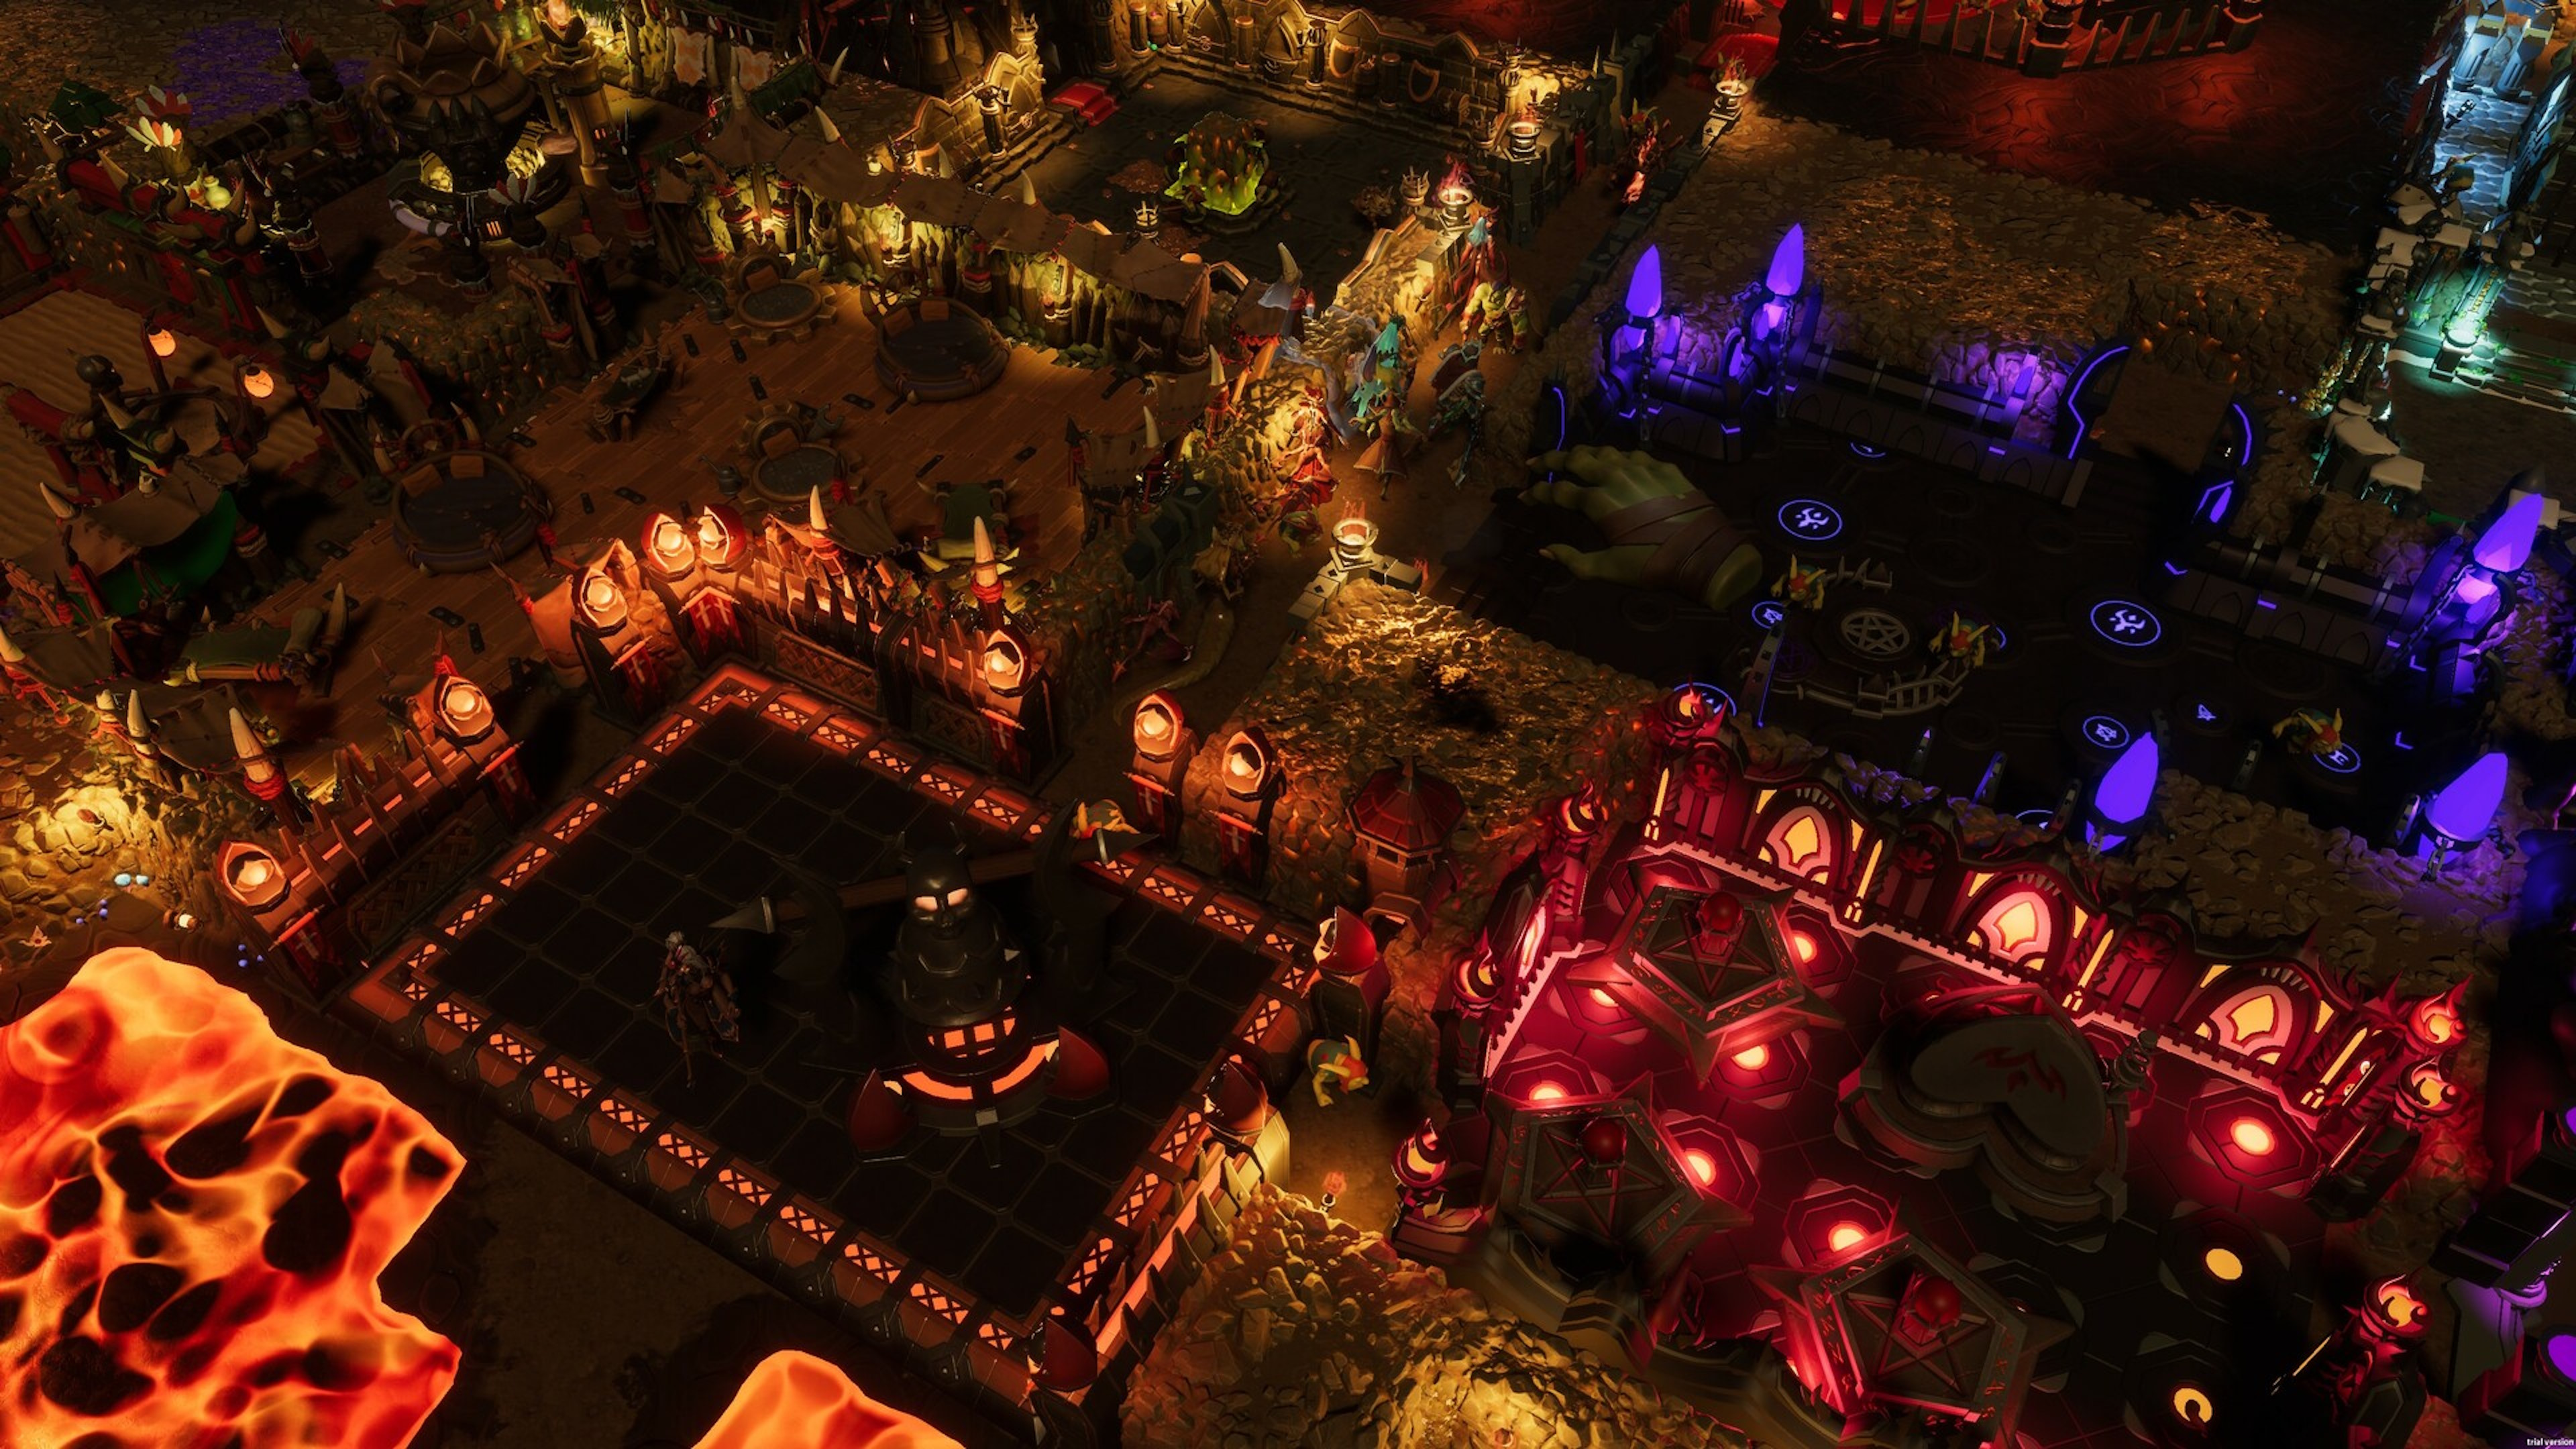  'Absolute Evil' simulator Dungeons 4 is coming in November, here's our first look at gameplay 